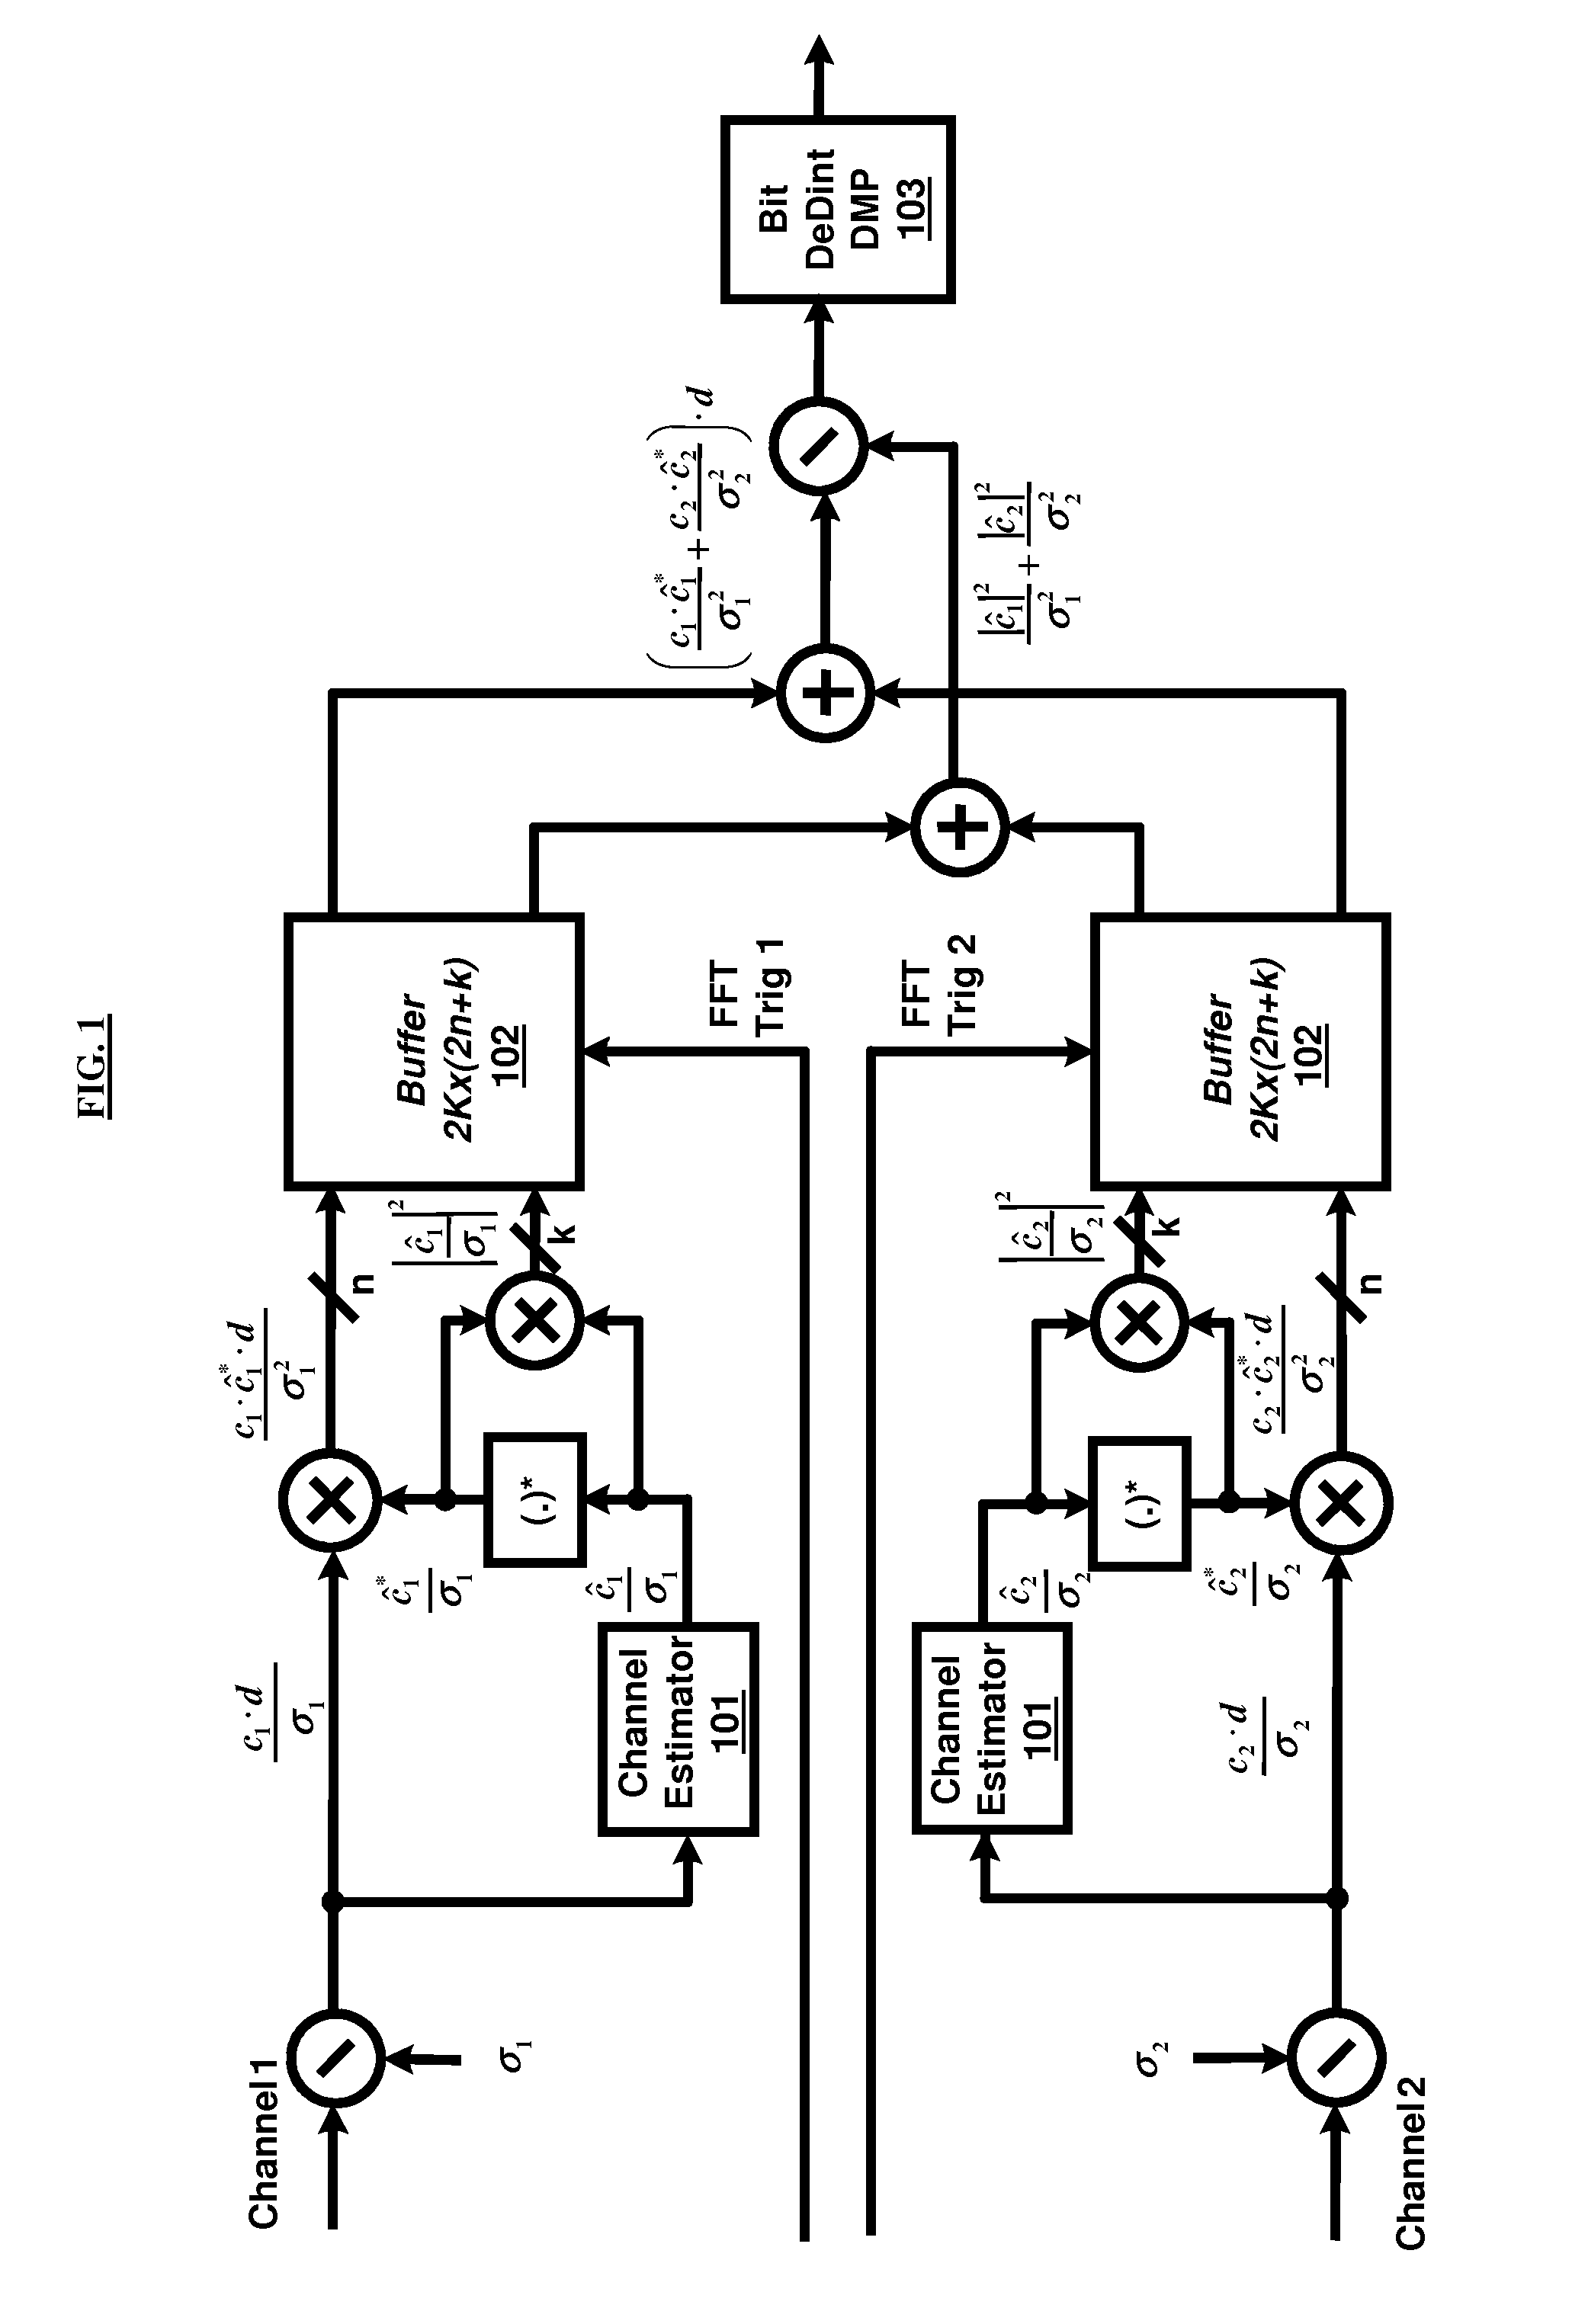 Double layer maximum ratio combining for an OFDM receiver with inter-carrier-interference cancelling